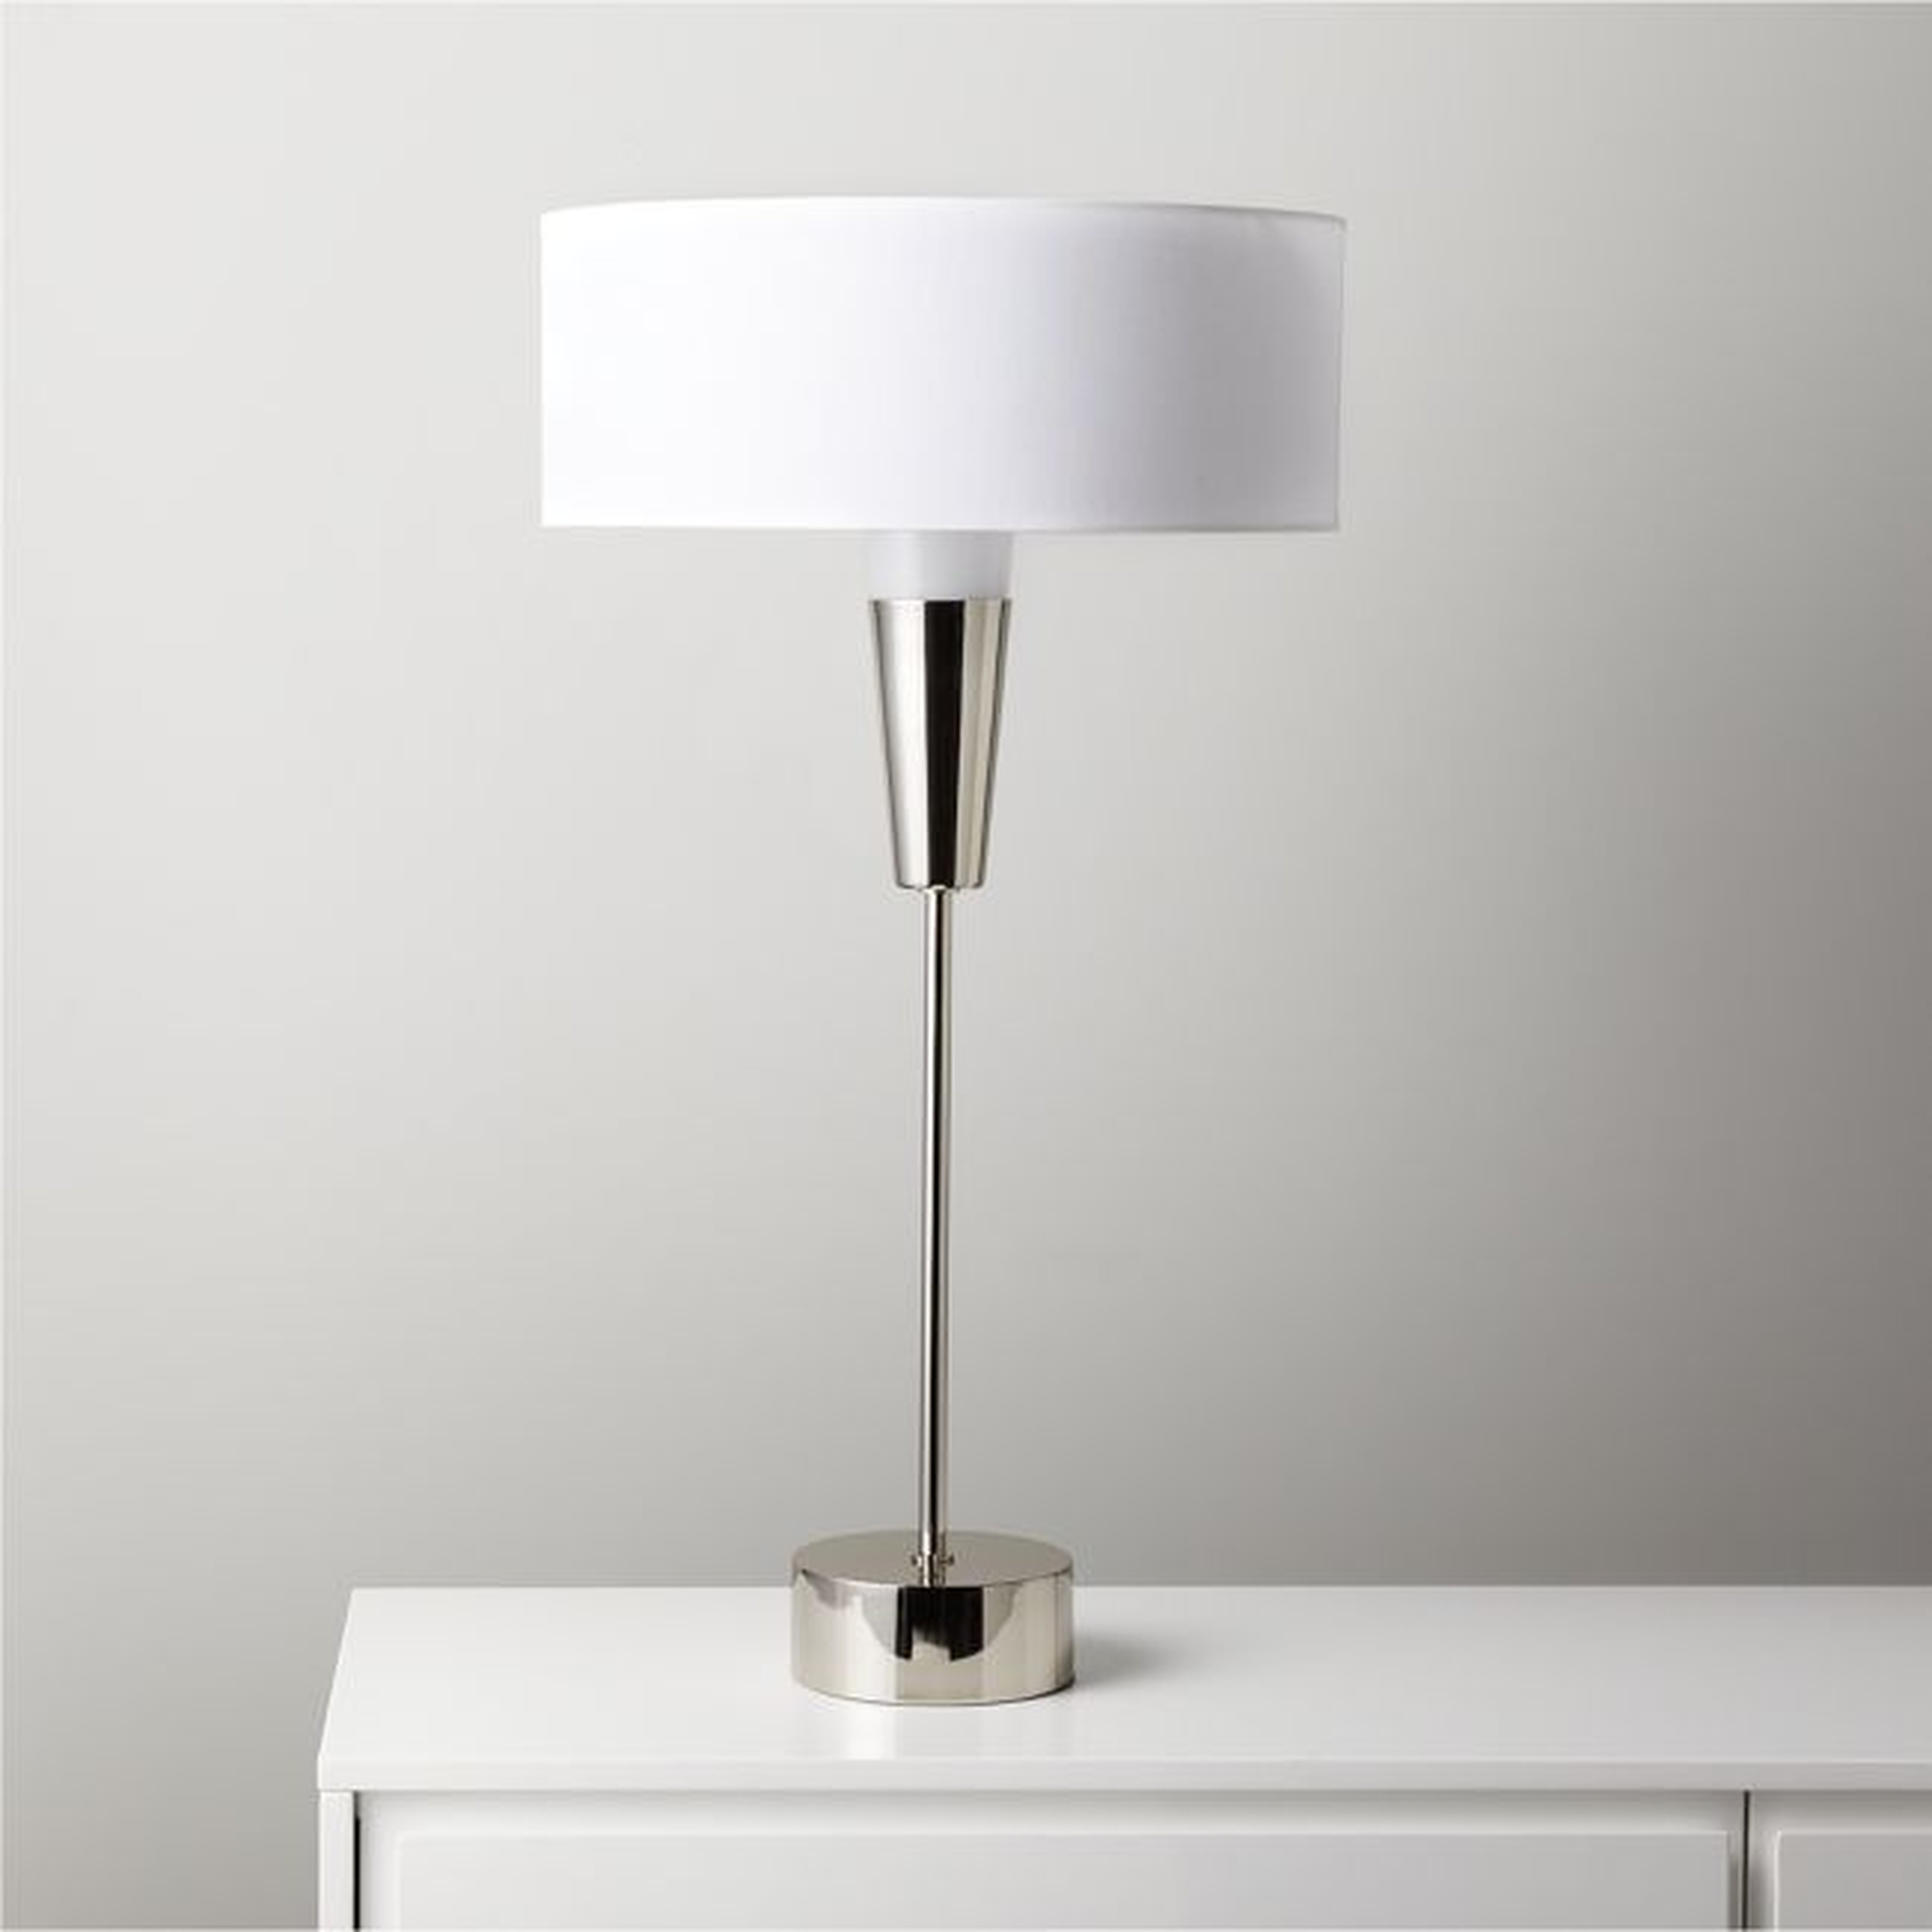 Exposior Polished Nickel Table Lamp Model 2022 - CB2